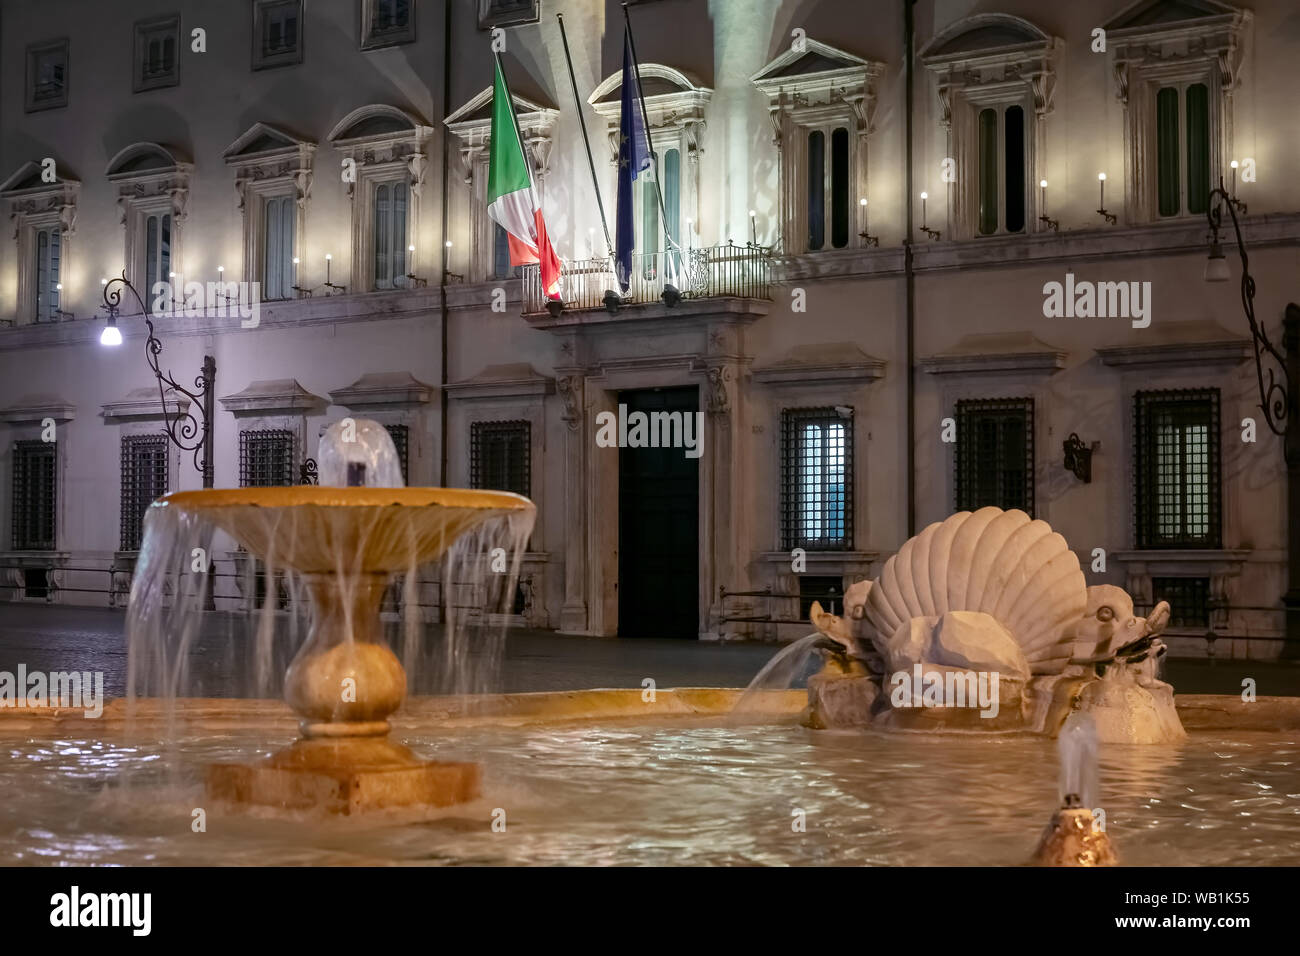 Rome, Italy - August 18, 2019: Palazzo Chigi, institutional seat of the Italian government. The main entrance with the building facade and flags. Stock Photo